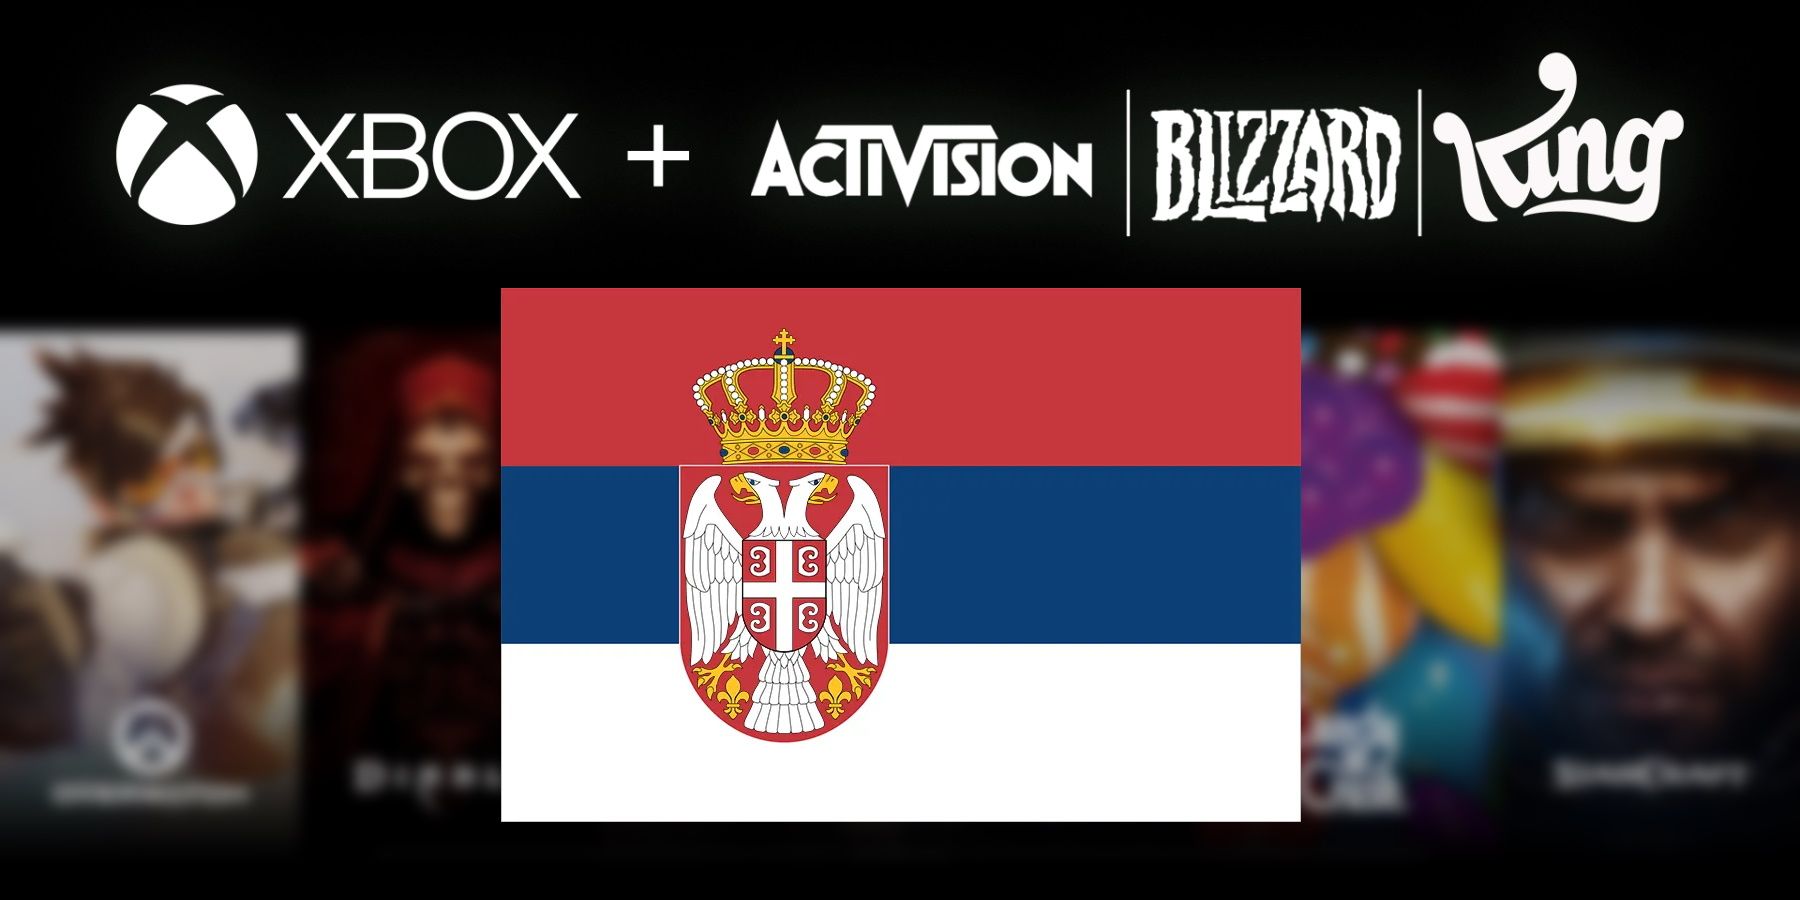 Brazil approves Microsoft's merger with Activision-Blizzard